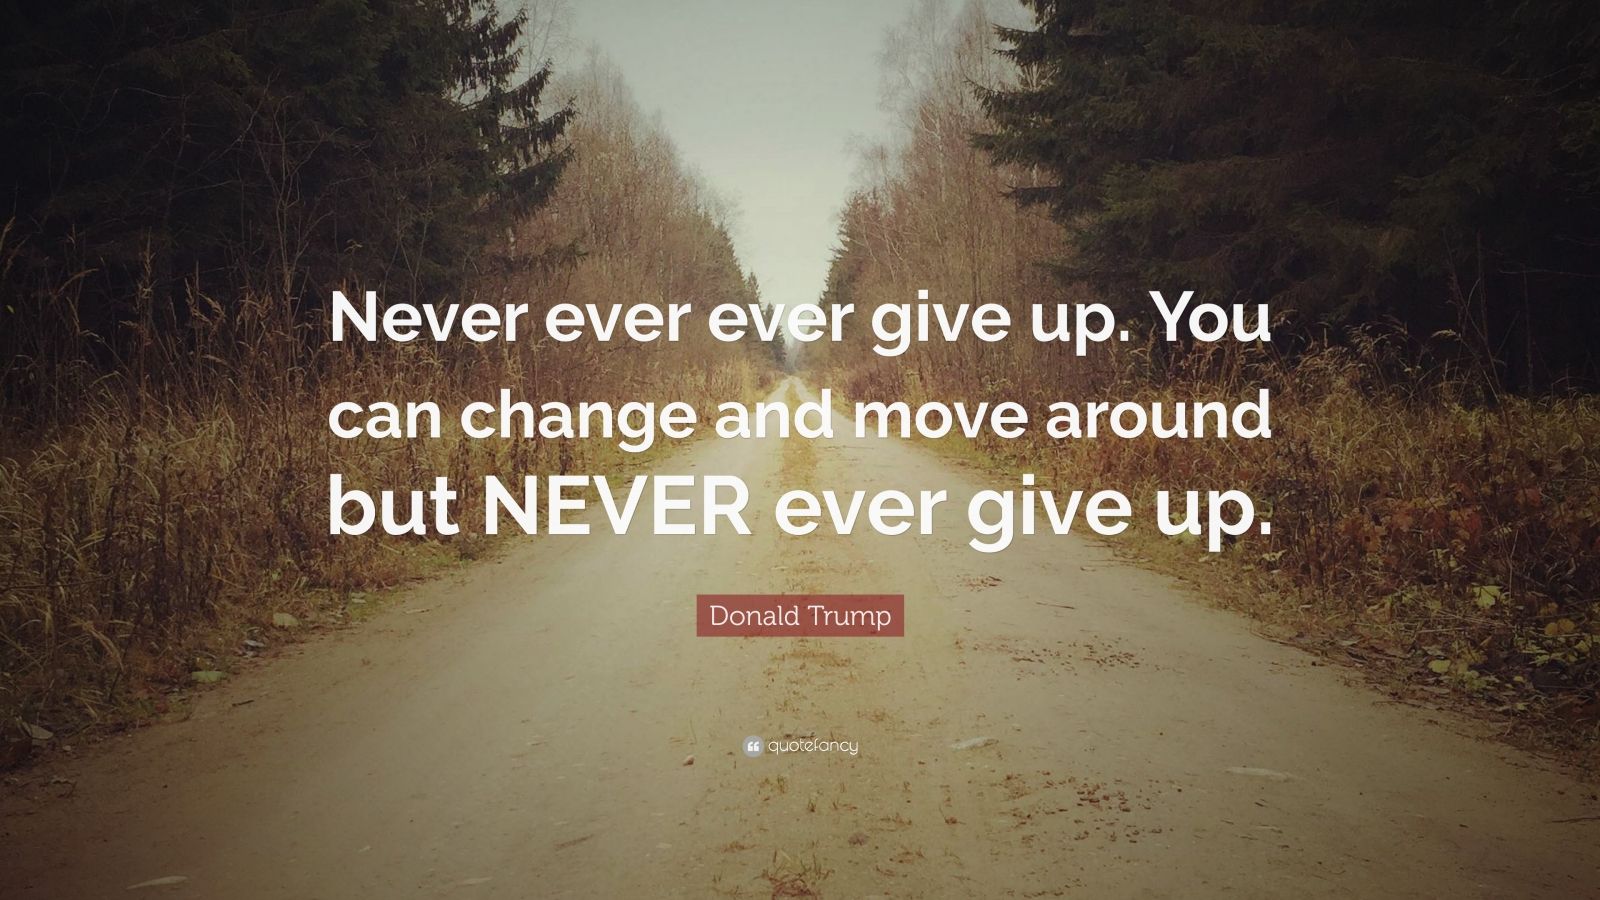 Donald Trump Quote: “Never ever ever give up. You can change and move